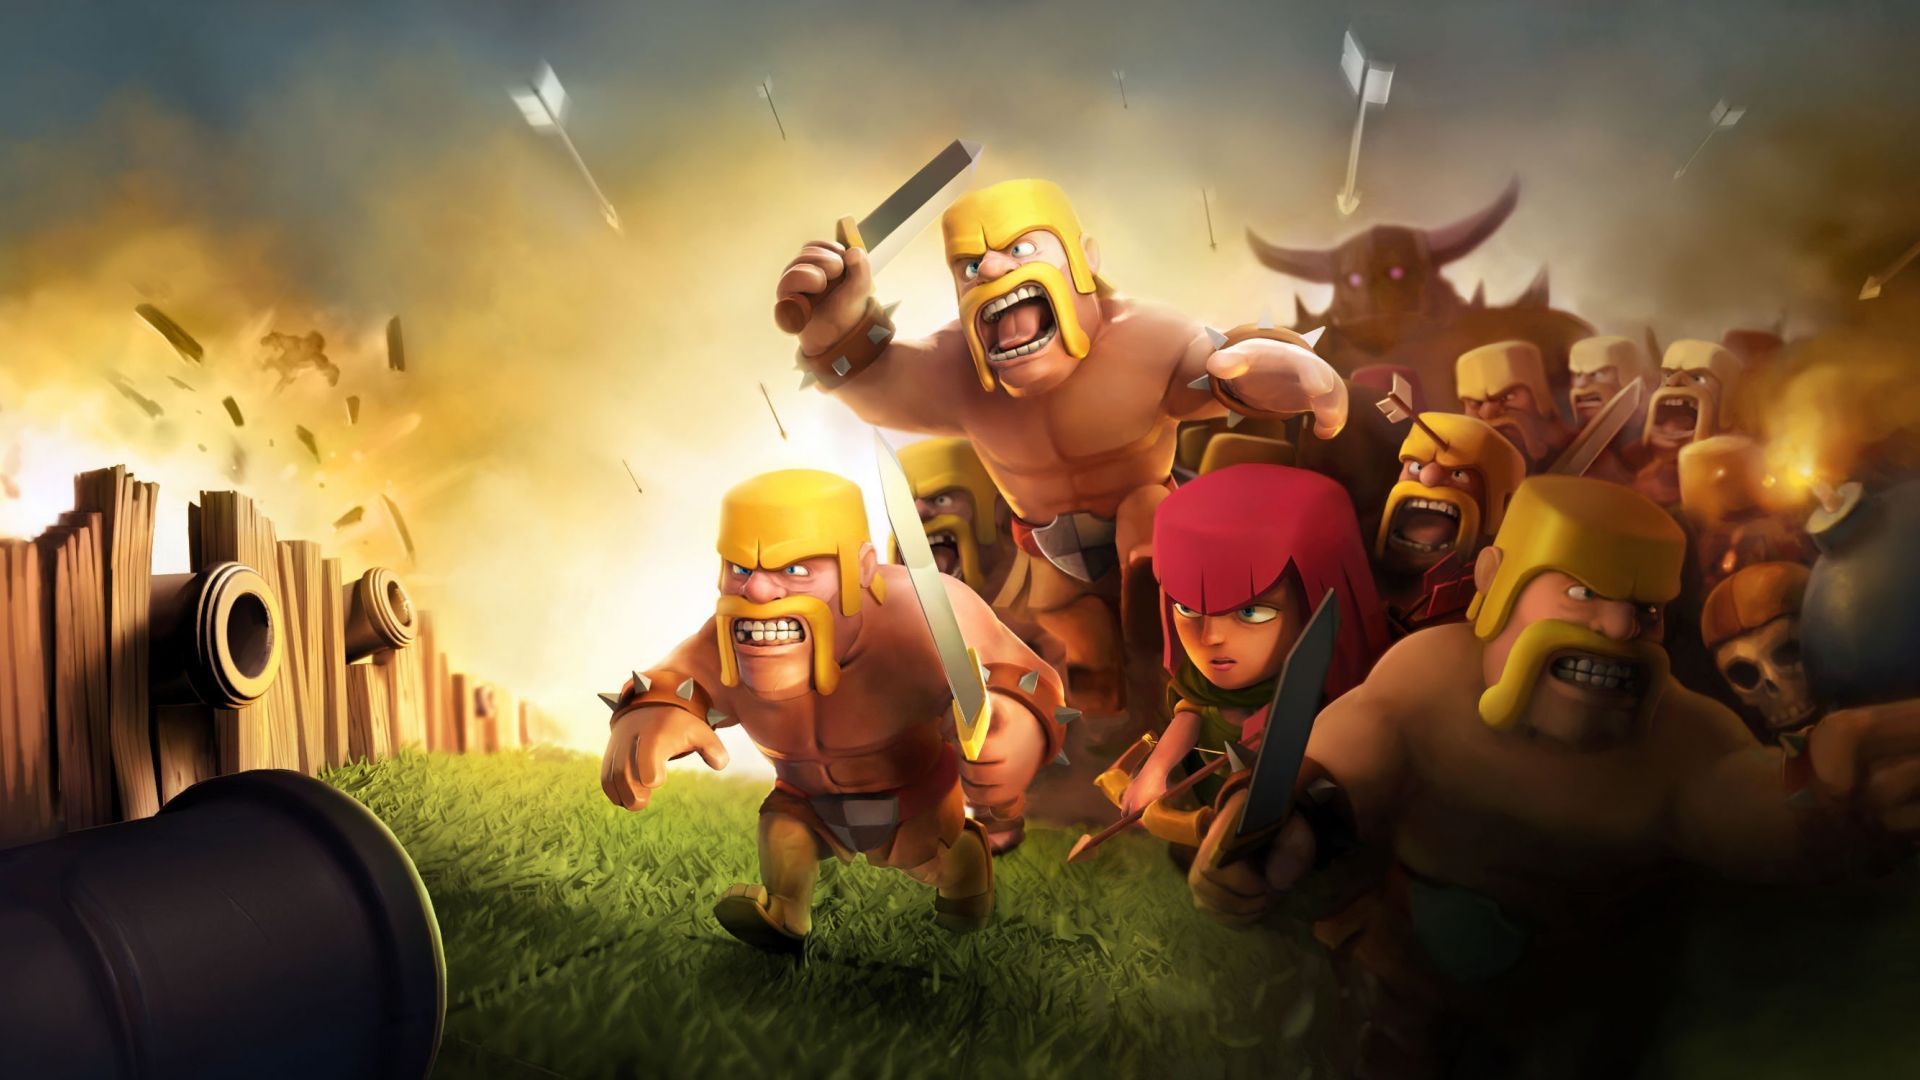 Wallpaper Clash of clans game